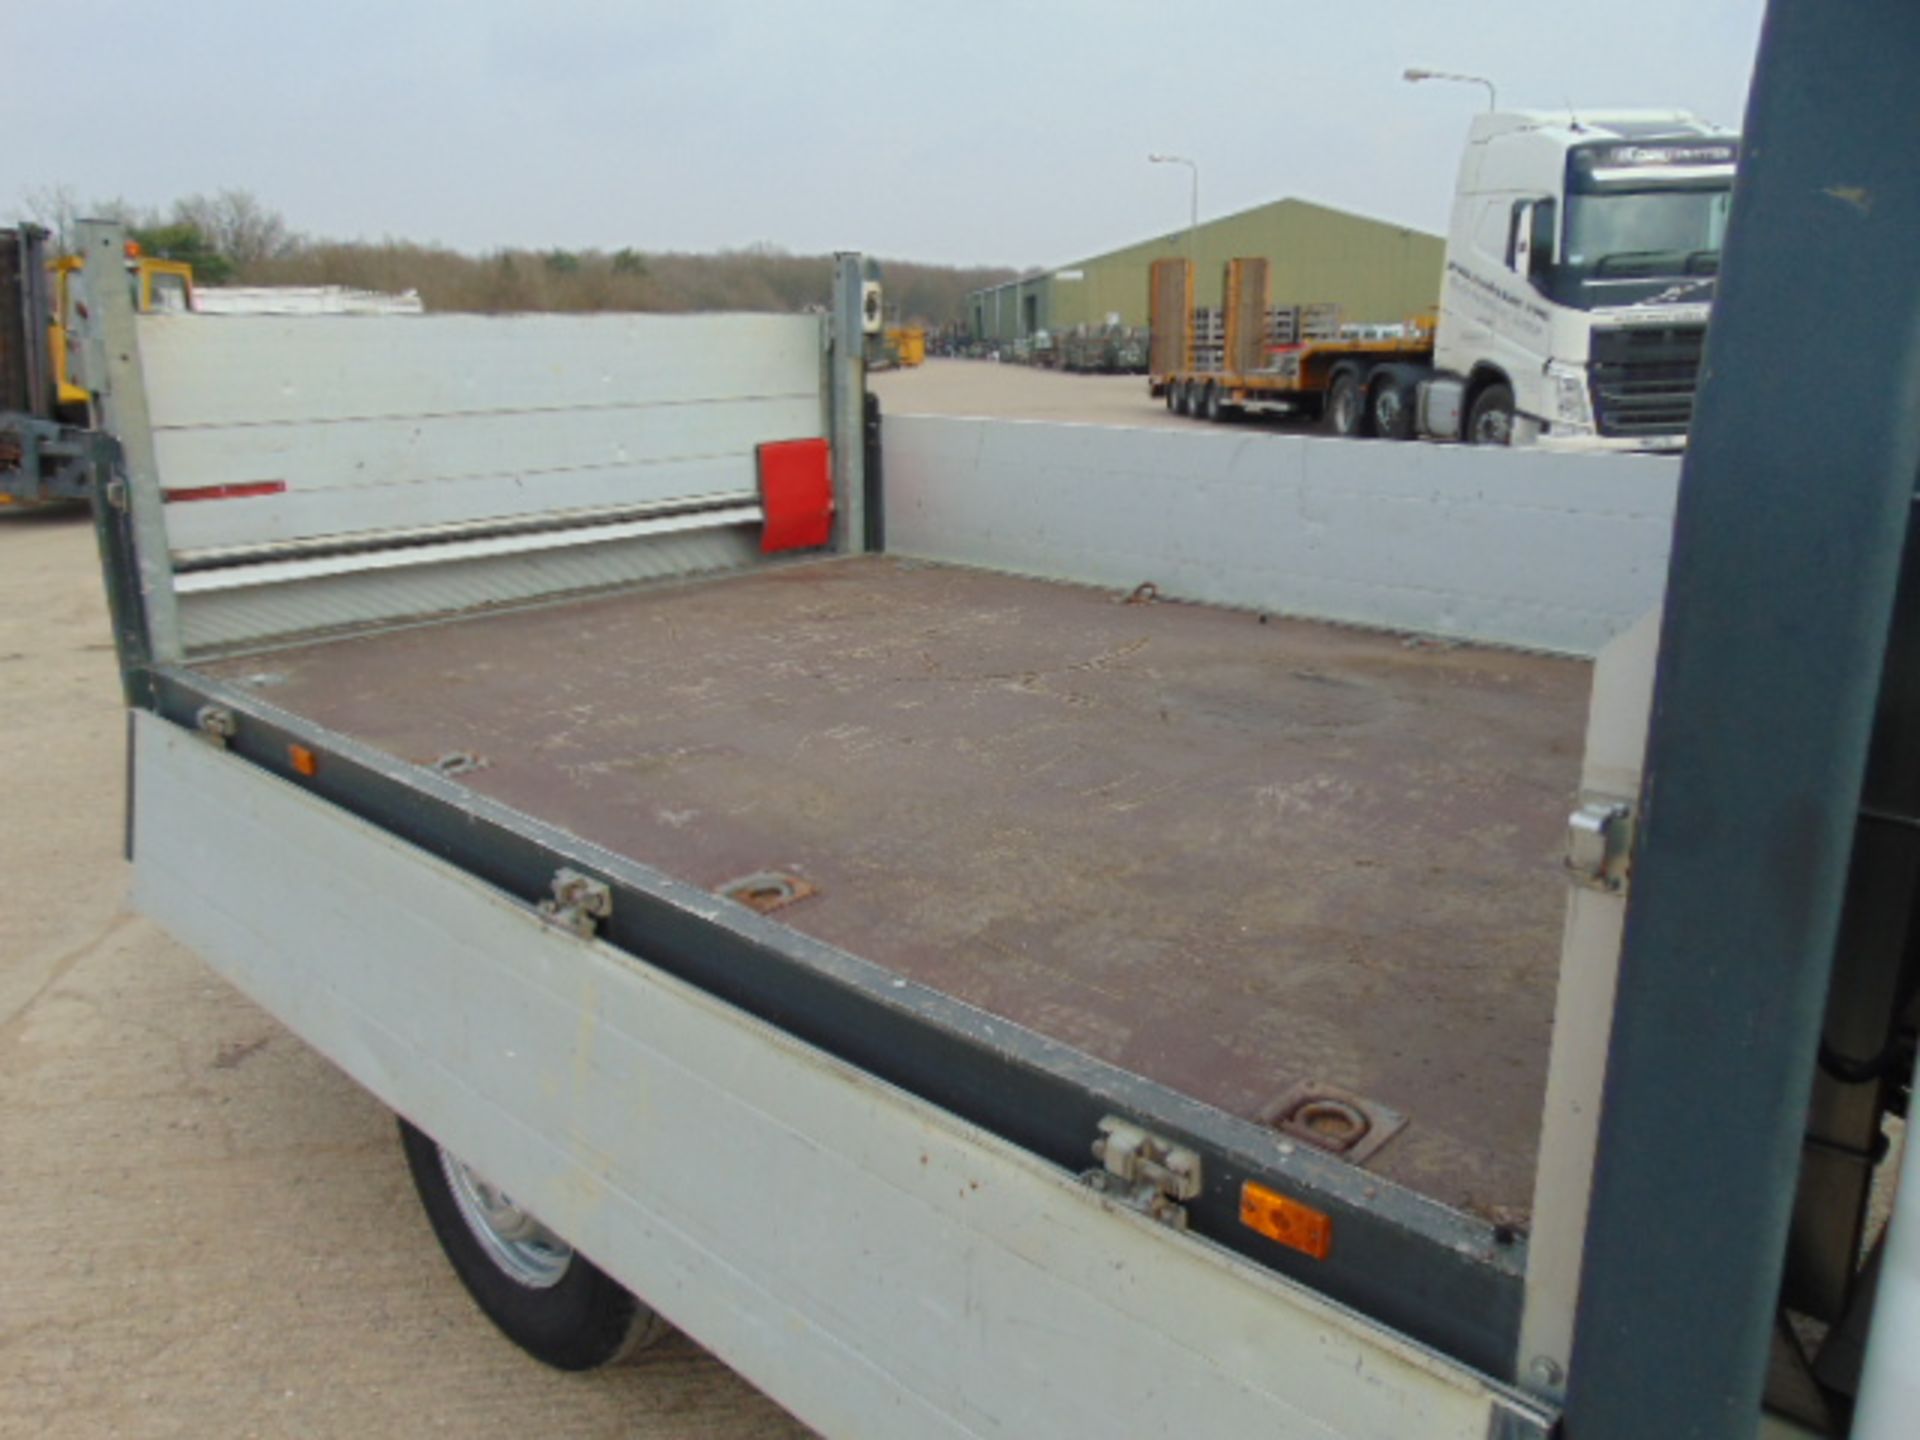 Citroen Relay 7 Seater Double Cab Dropside Pickup with 500kg Ratcliff Palfinger Tail Lift - Image 16 of 27